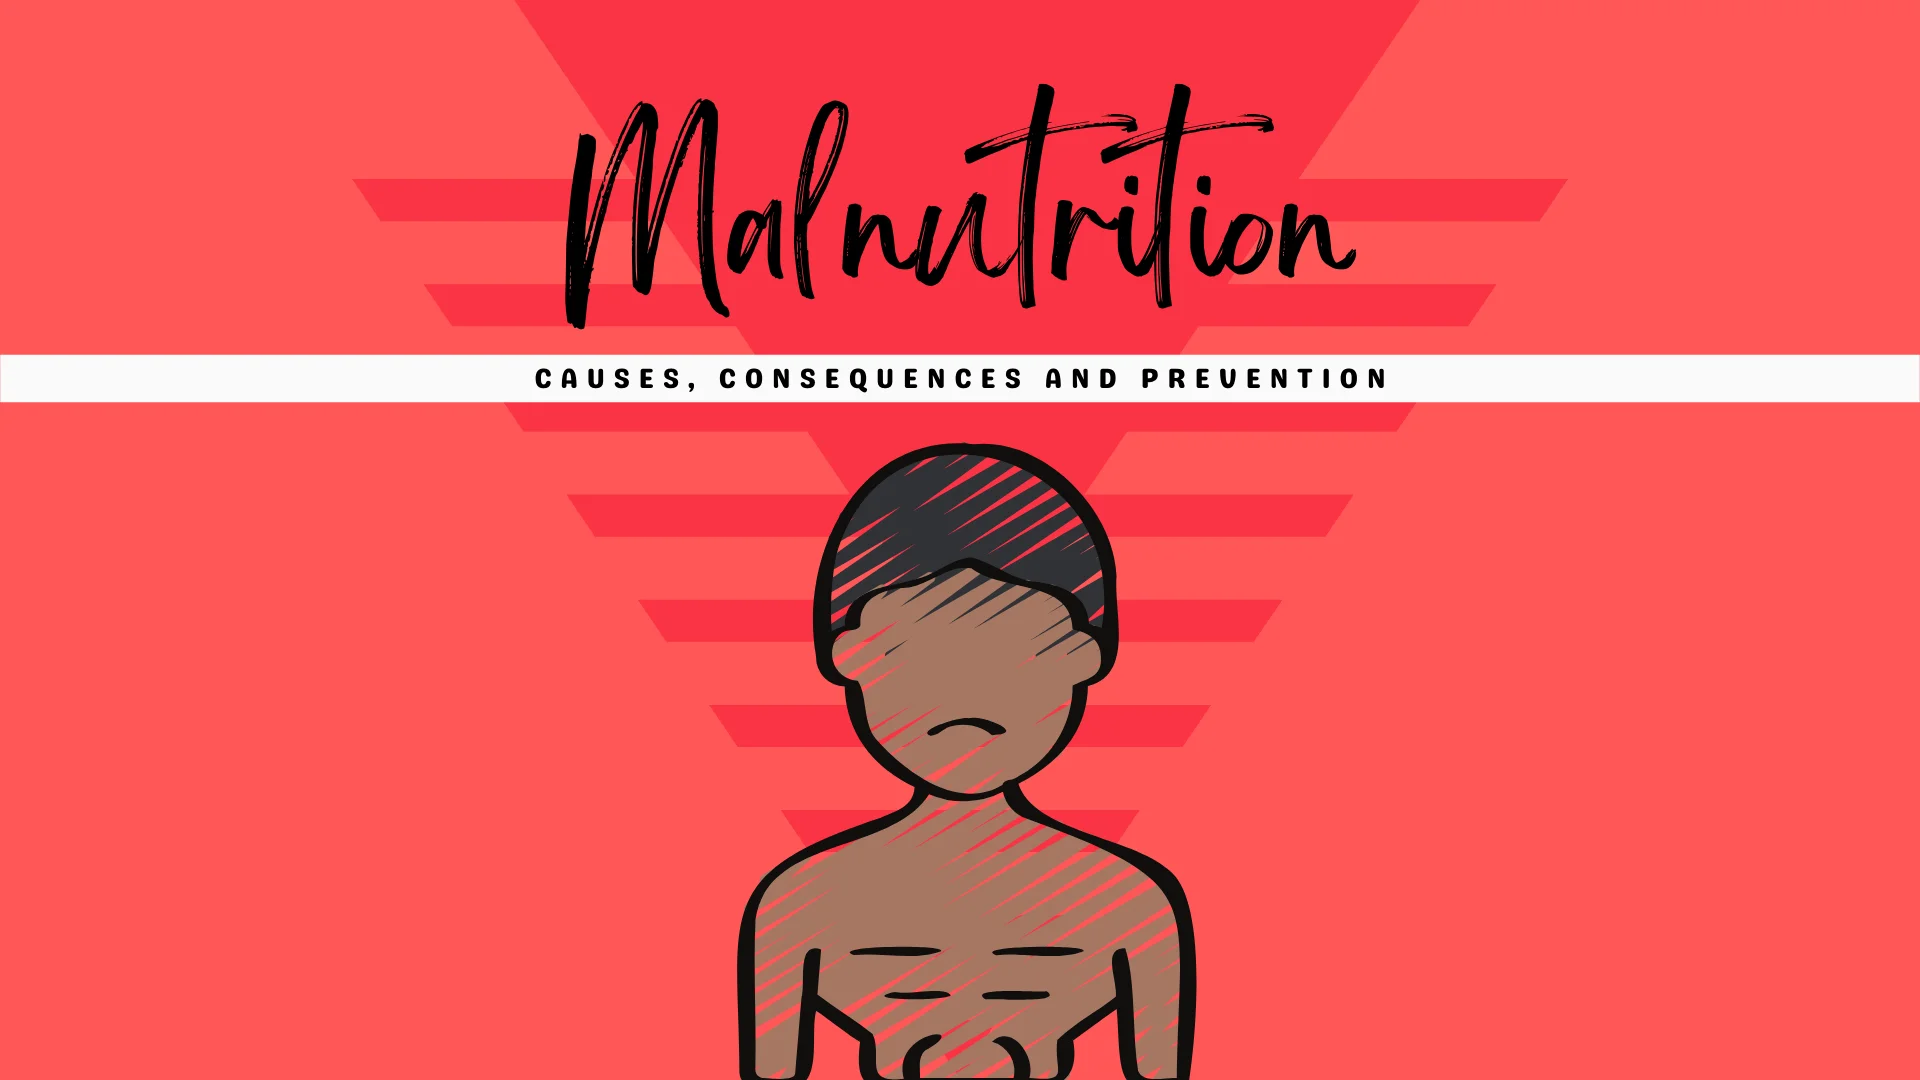 Malnutrition Course Images